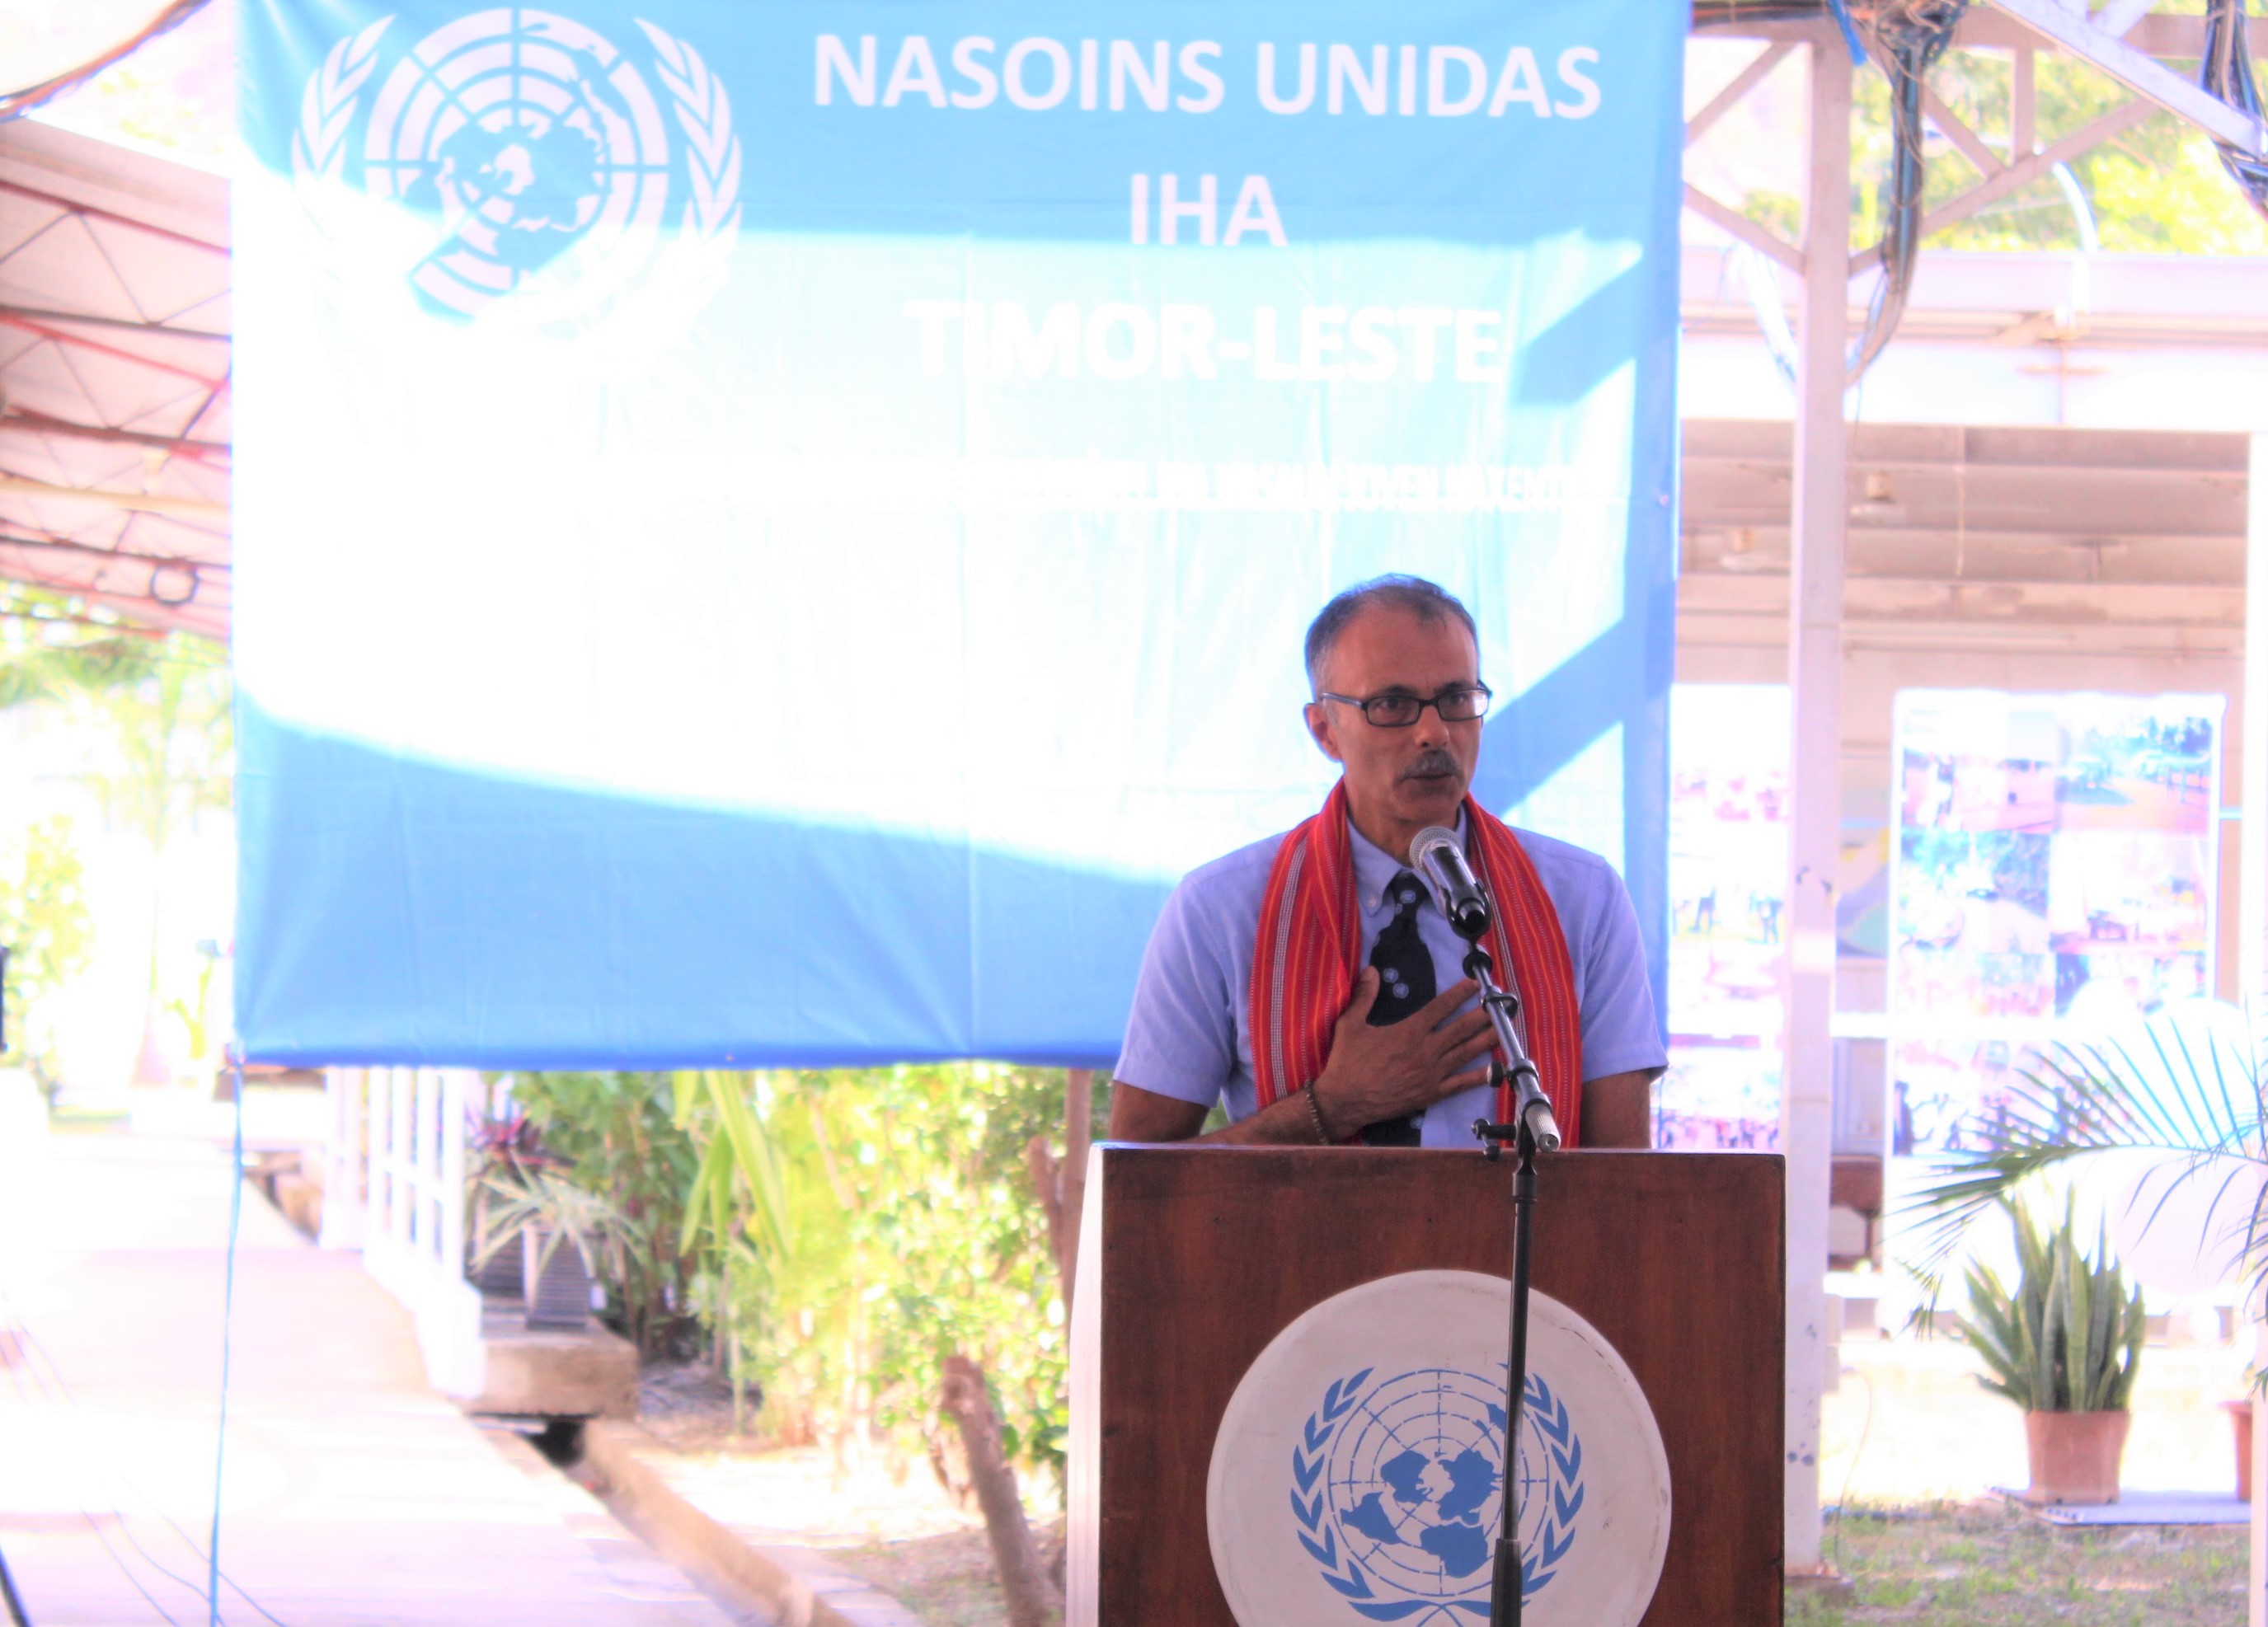 UN Resident Coordinator's speech at the opening of a memorial for all those who died in the service of the UN in Timor-Leste